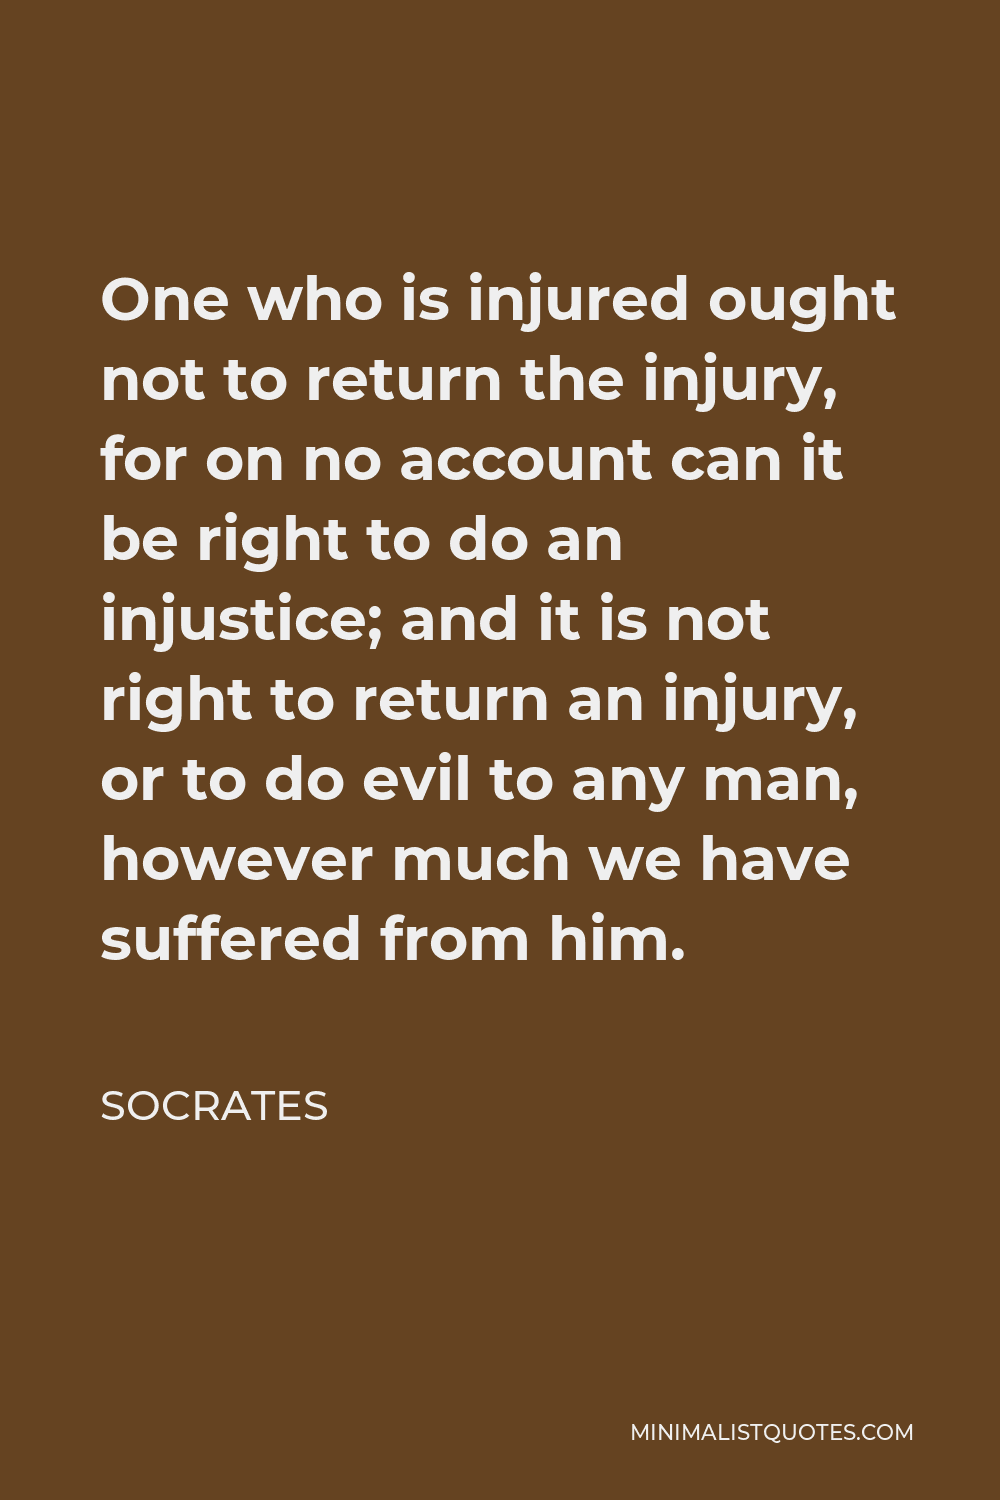 Socrates Quote - One who is injured ought not to return the injury, for on no account can it be right to do an injustice; and it is not right to return an injury, or to do evil to any man, however much we have suffered from him.